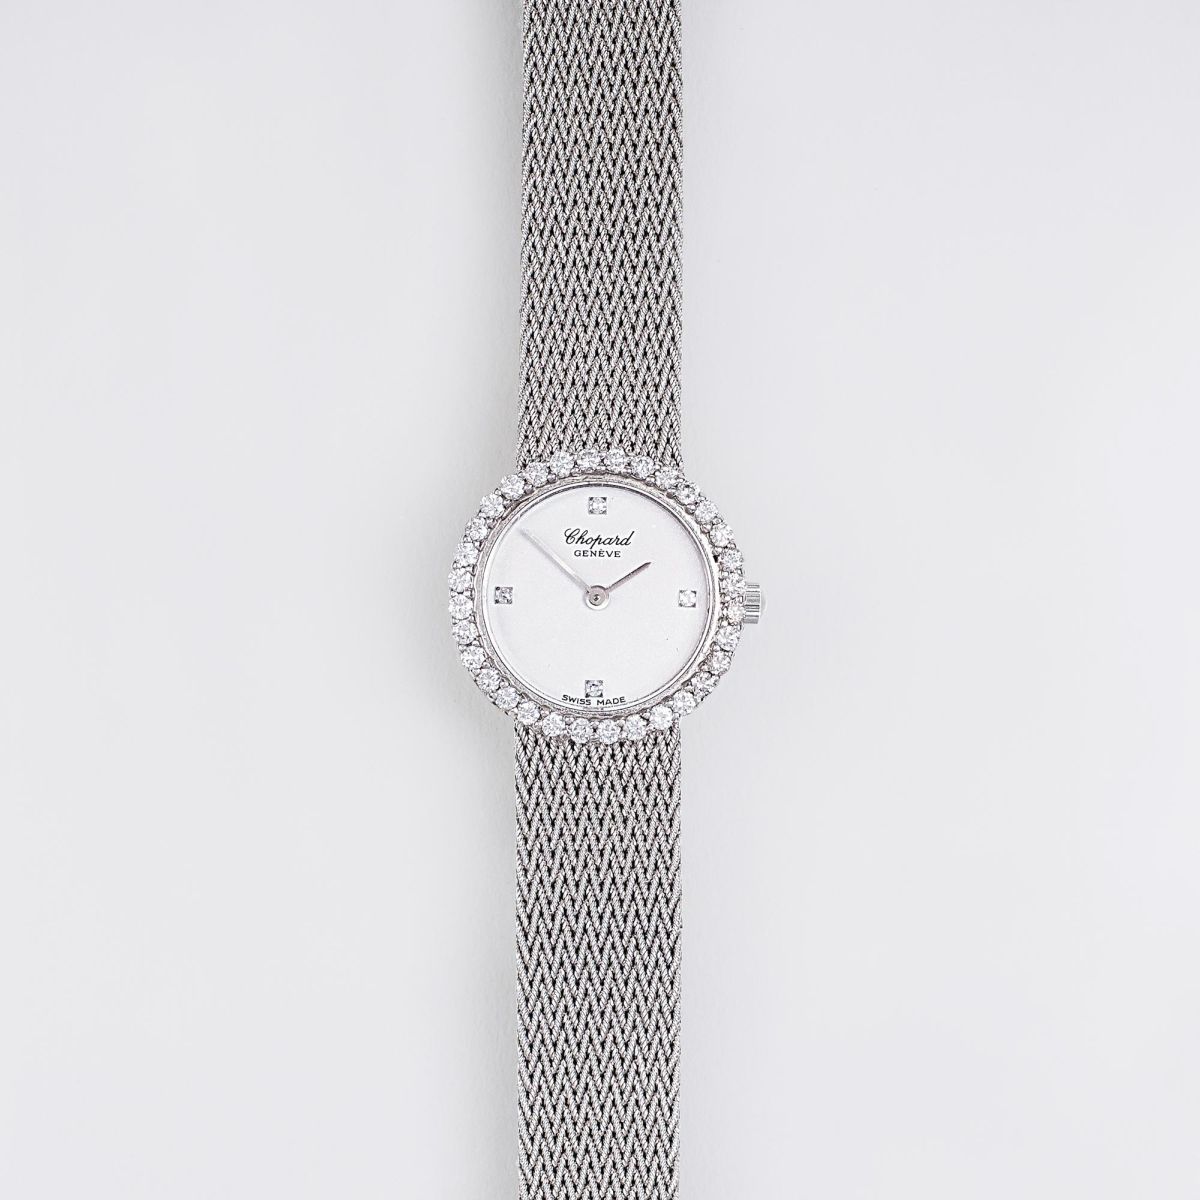 A Ladies' Watch with Diamonds